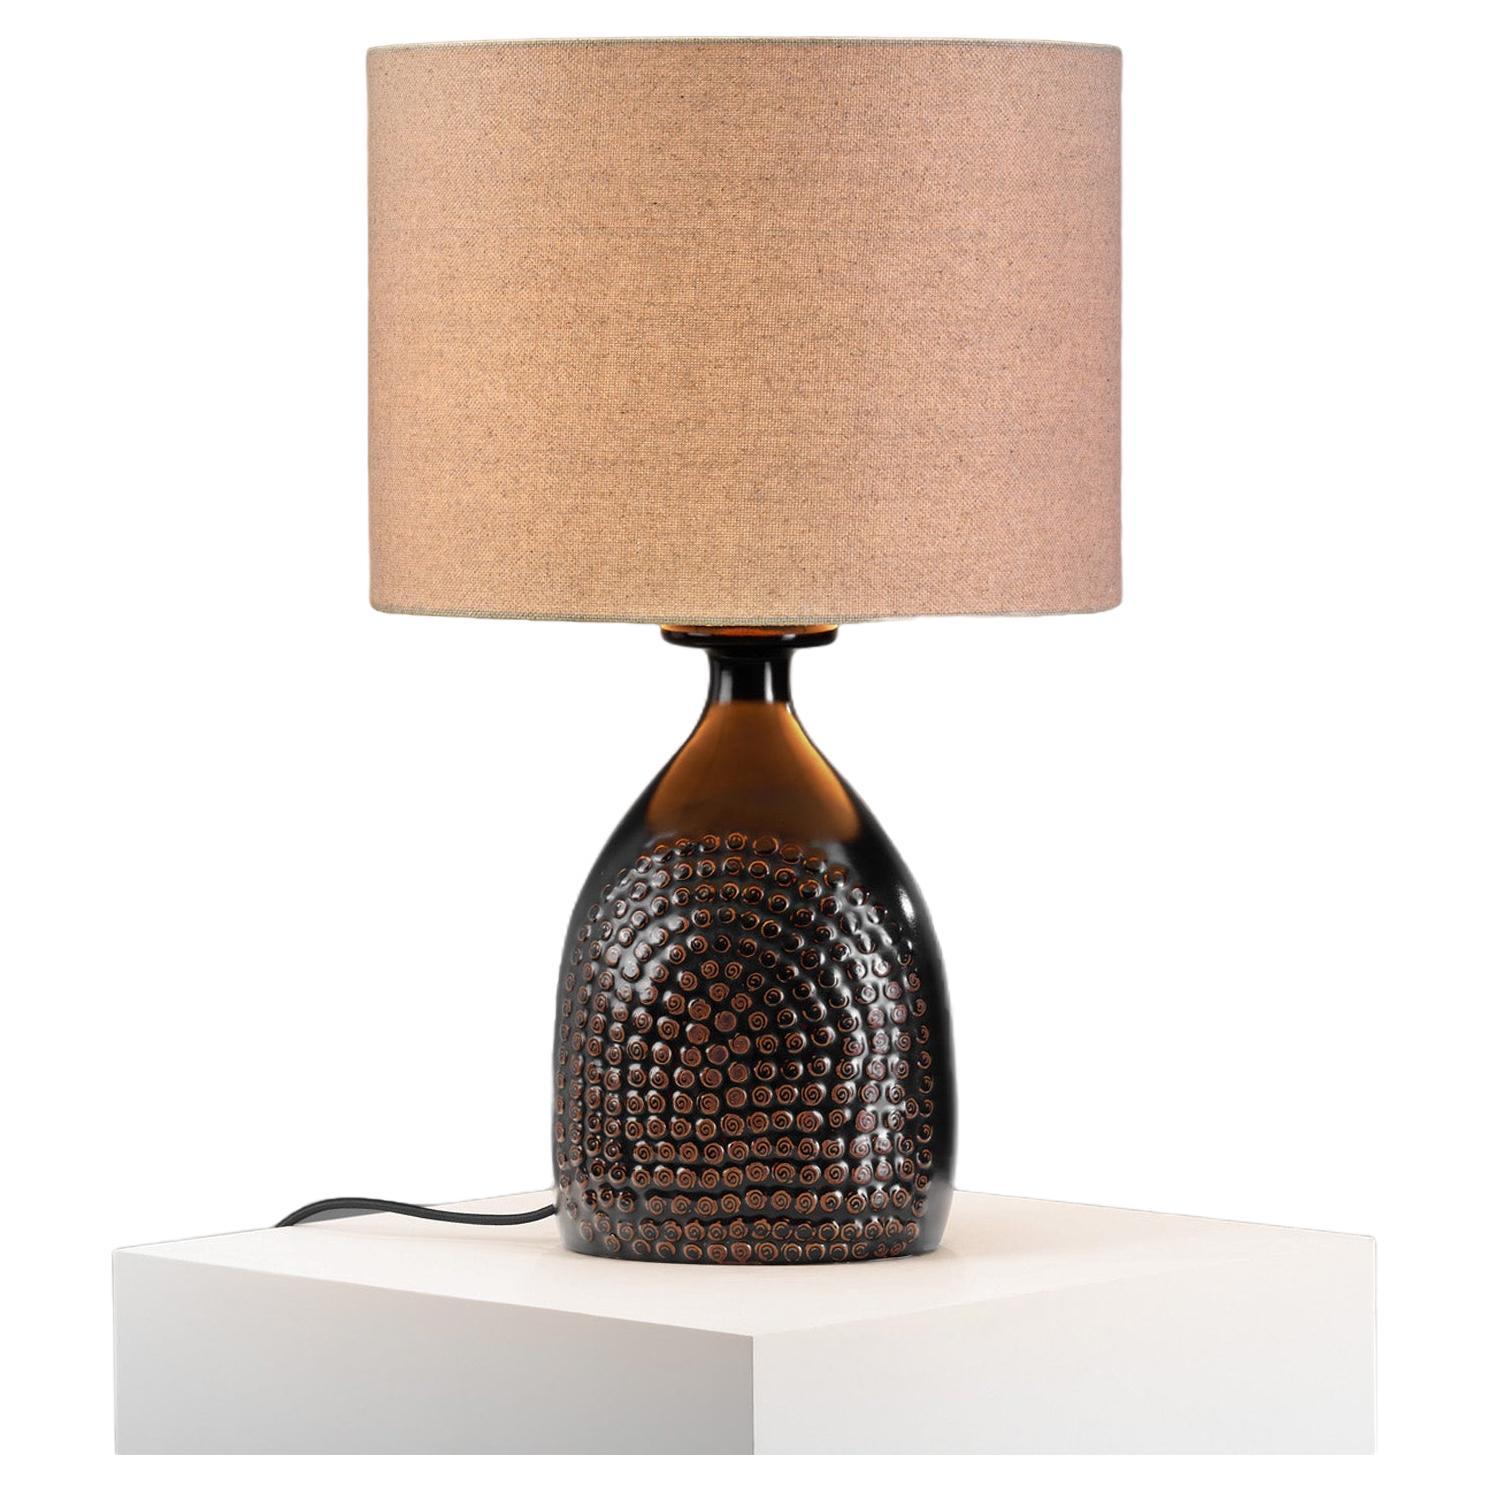 Stig Lindberg Stoneware Table Lamp with Fabric Shade, Sweden 1960s For Sale